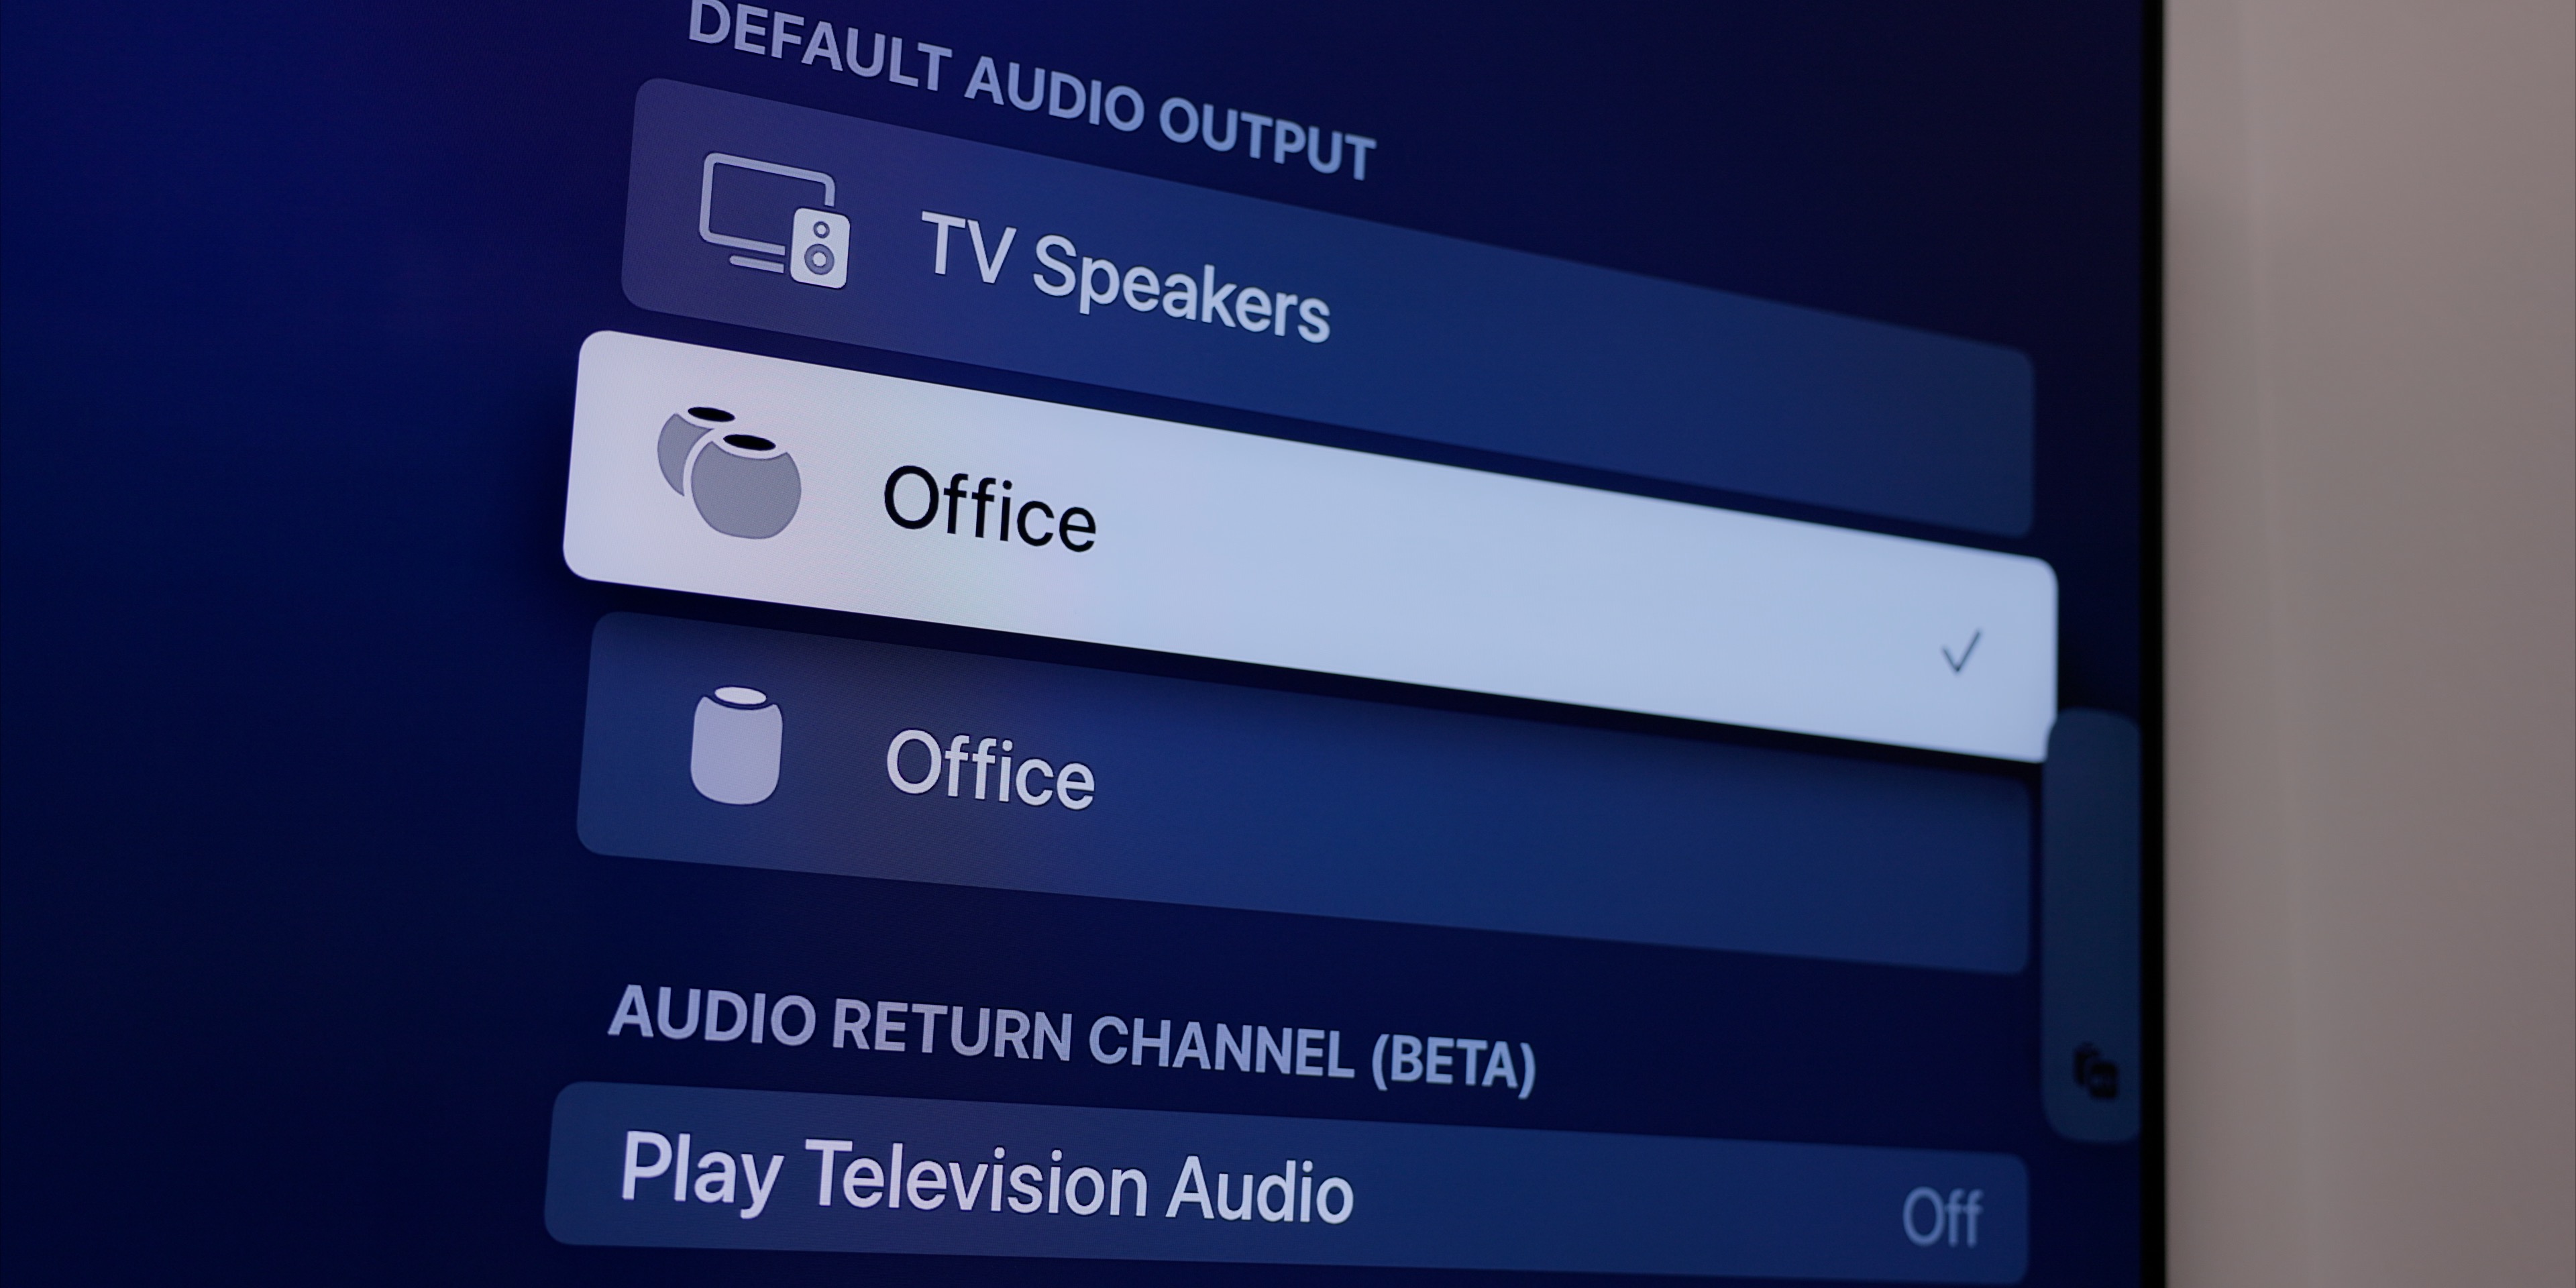 iOS 16.1 hints at new way to group multiple HomePods and AirPlay 2 speakers.